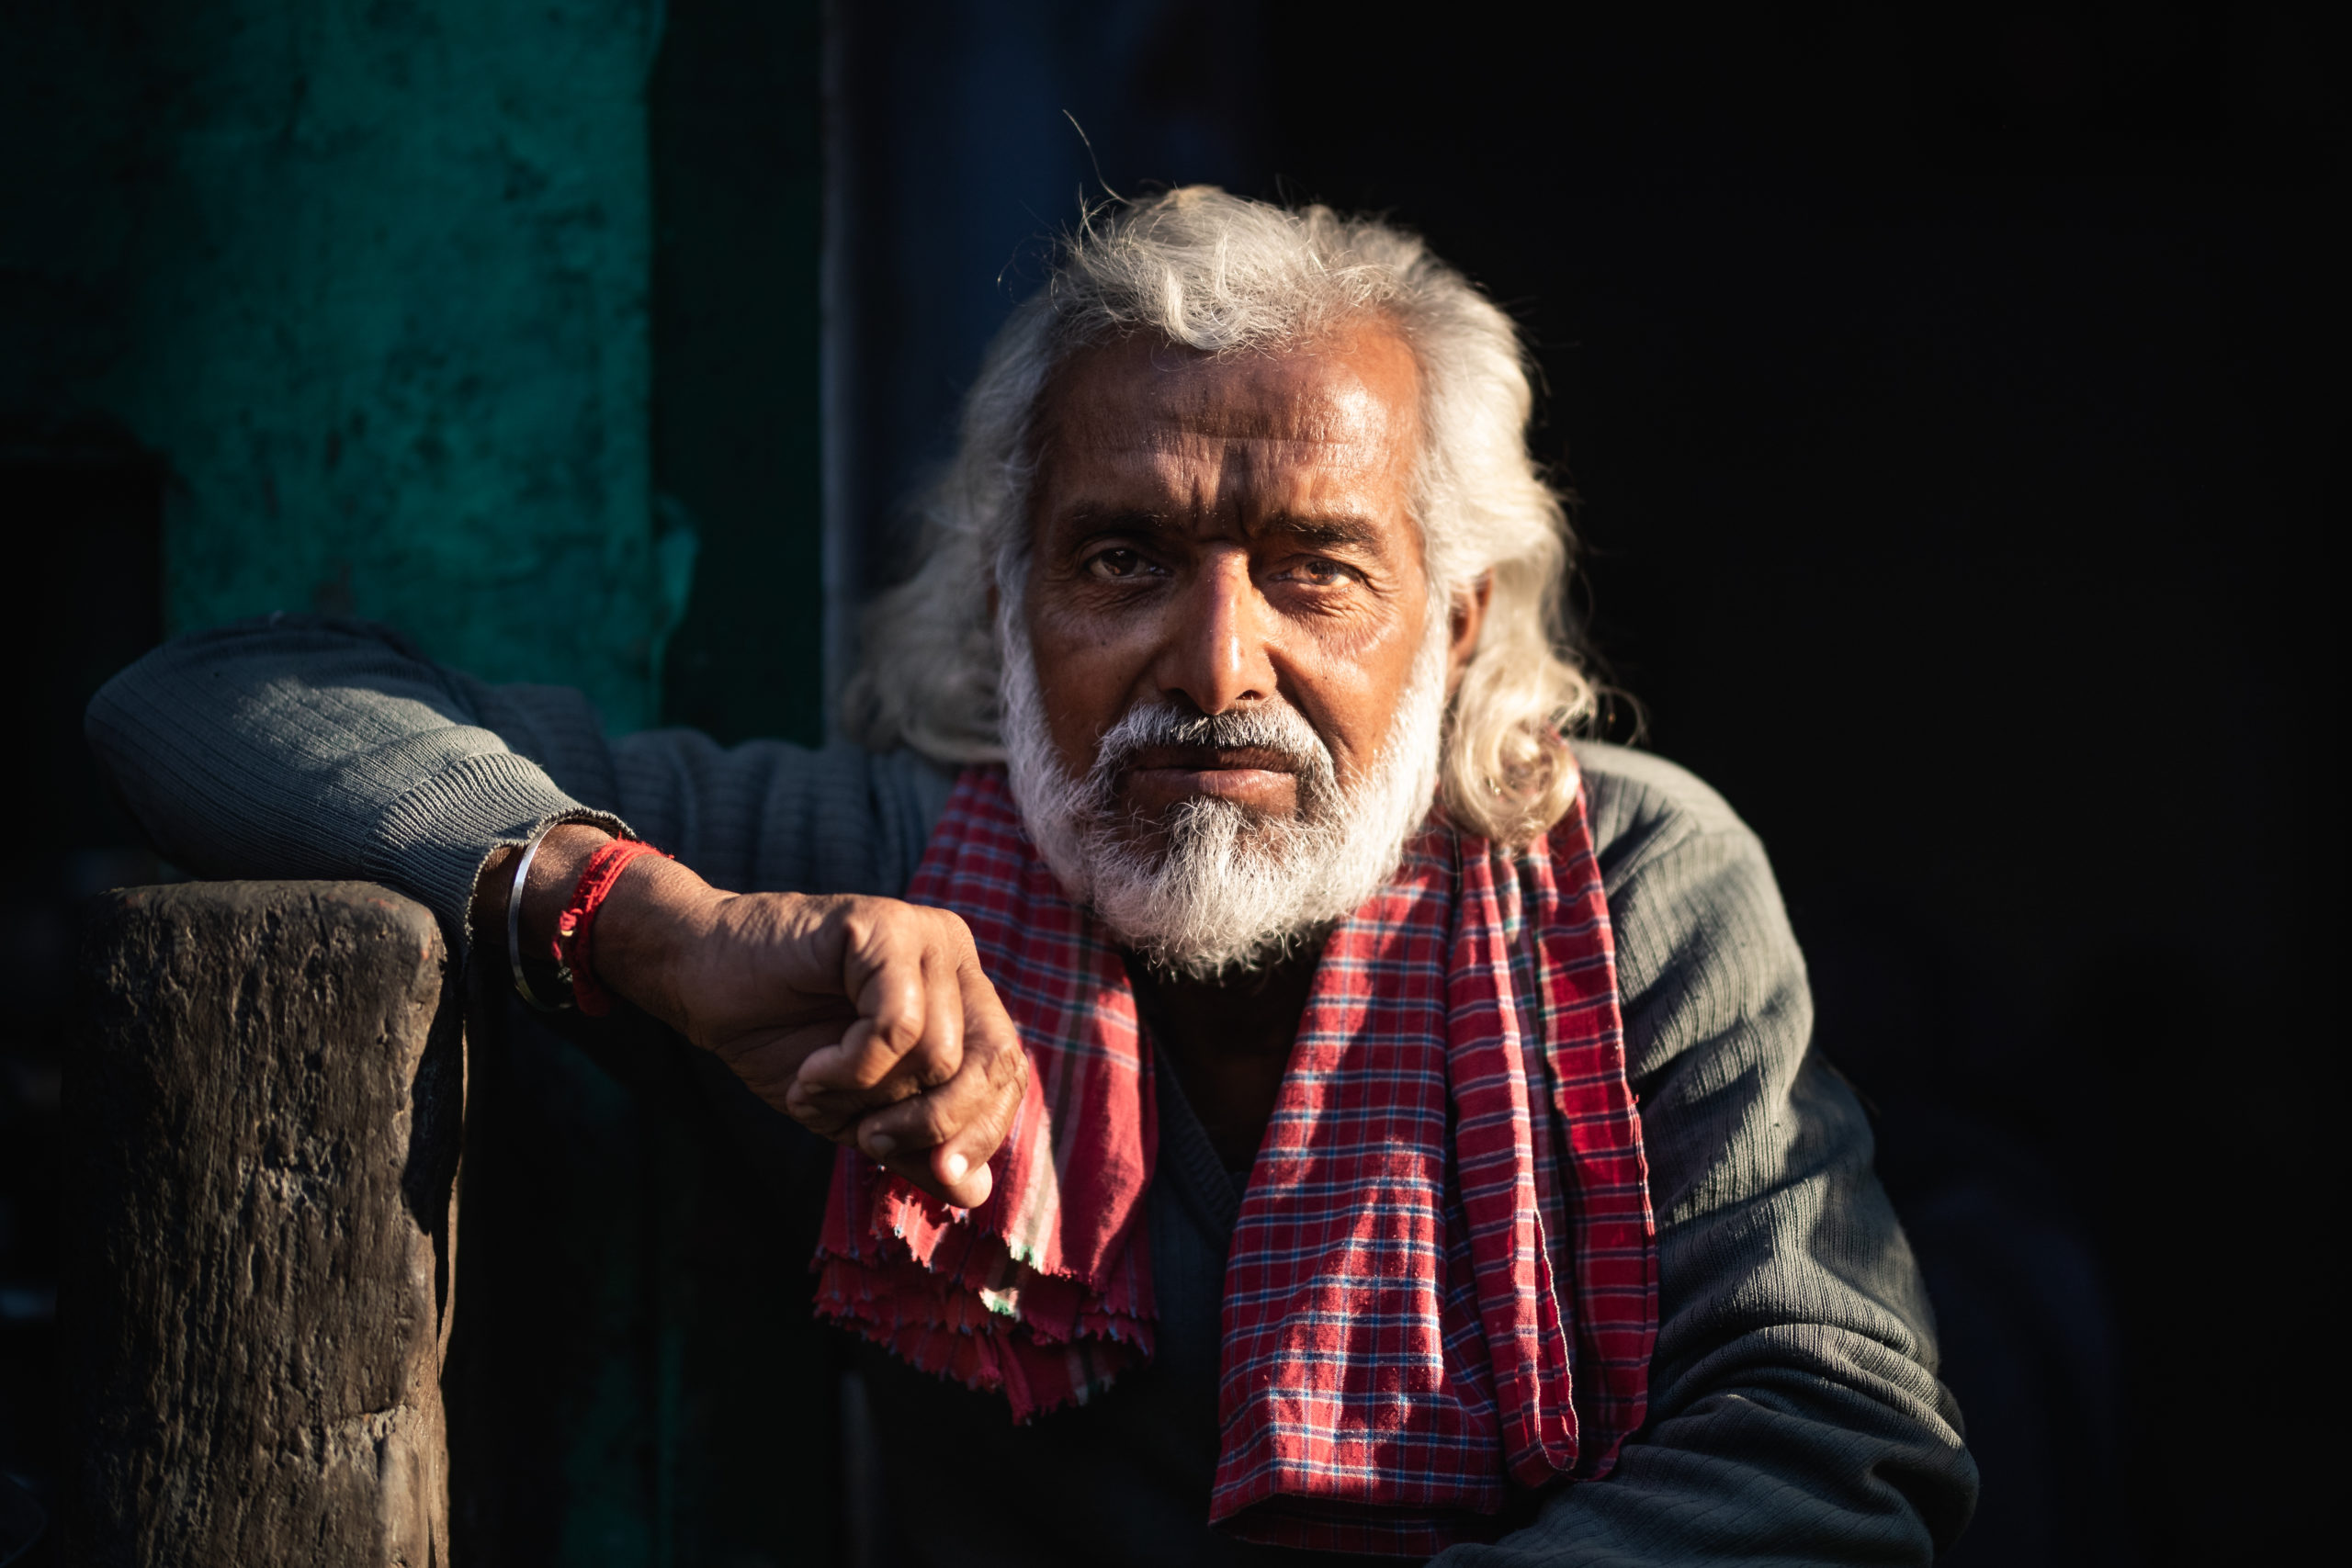 Street Photography of an elderly man during sunset in Mathura, India